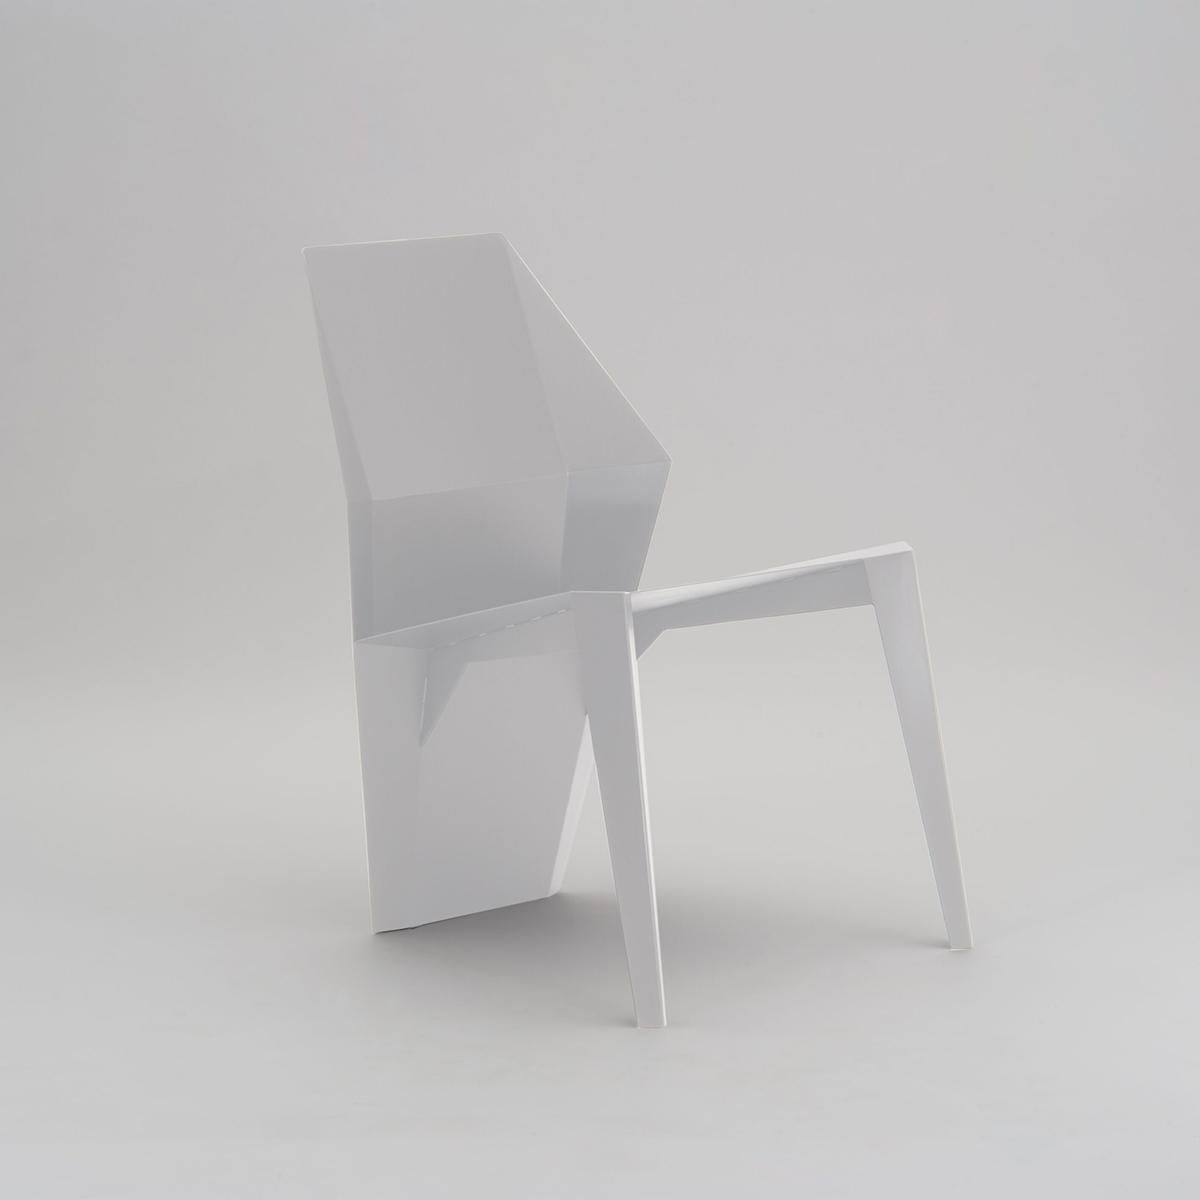 Centaurus Sculptural Chair with soft-touch powder coated finish 2